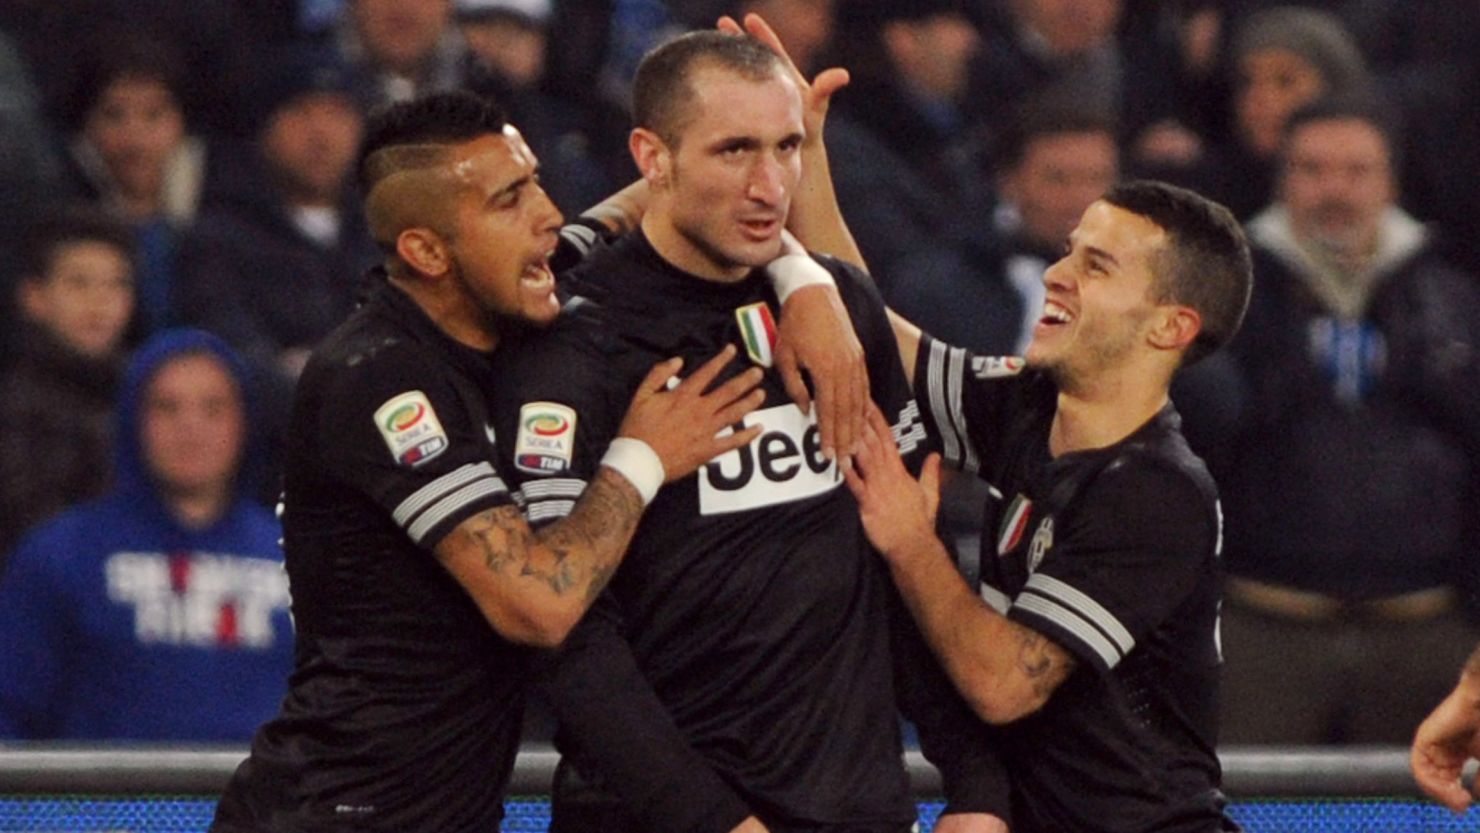 Giorgio Chiellini is congratulated by teammates after putting Juventus into the lead at Napoli.